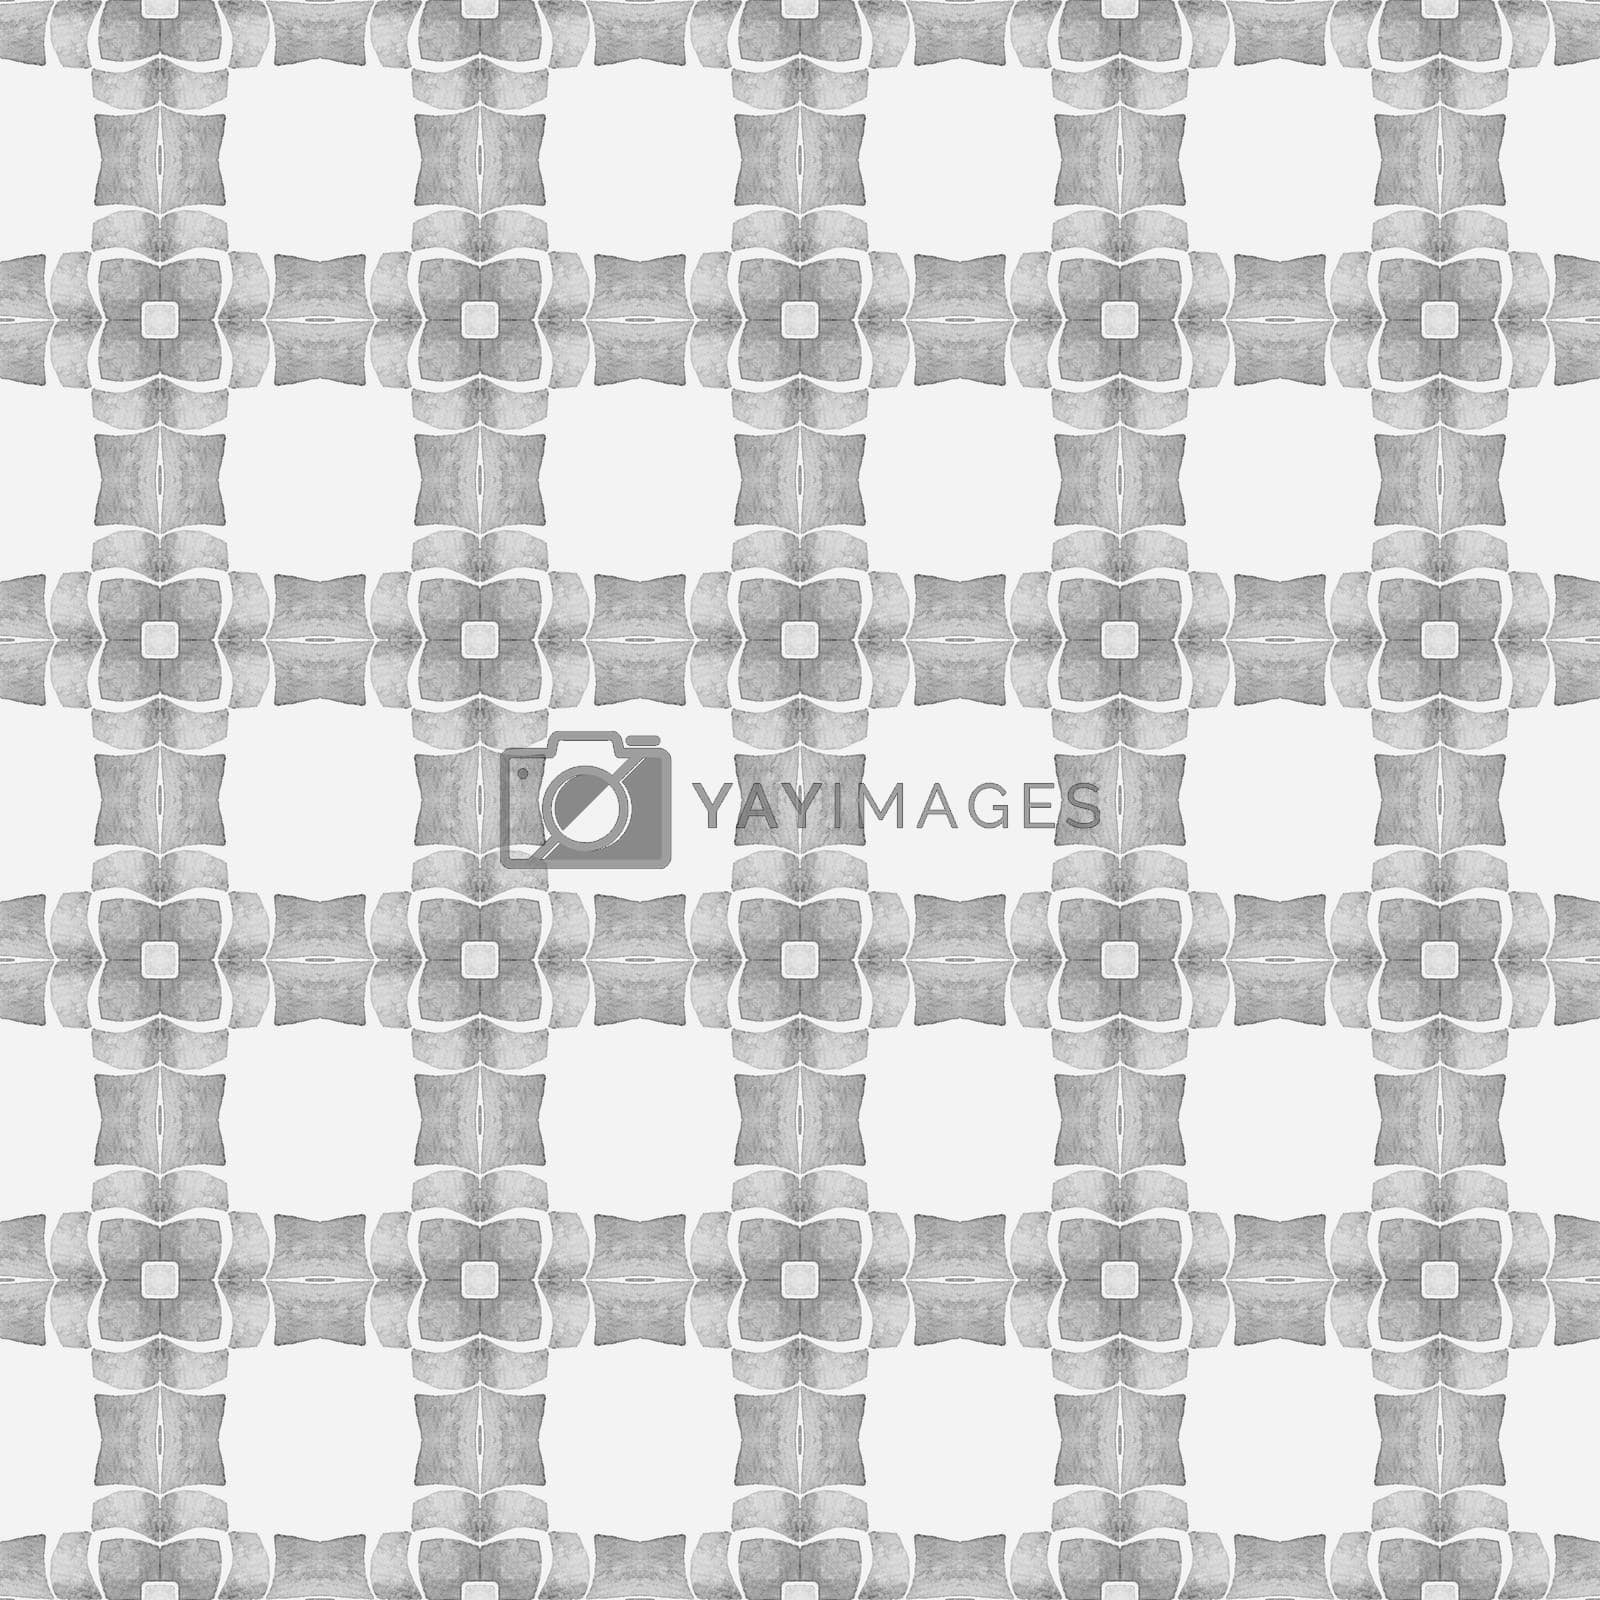 Royalty free image of Medallion seamless pattern. Black and white by beginagain